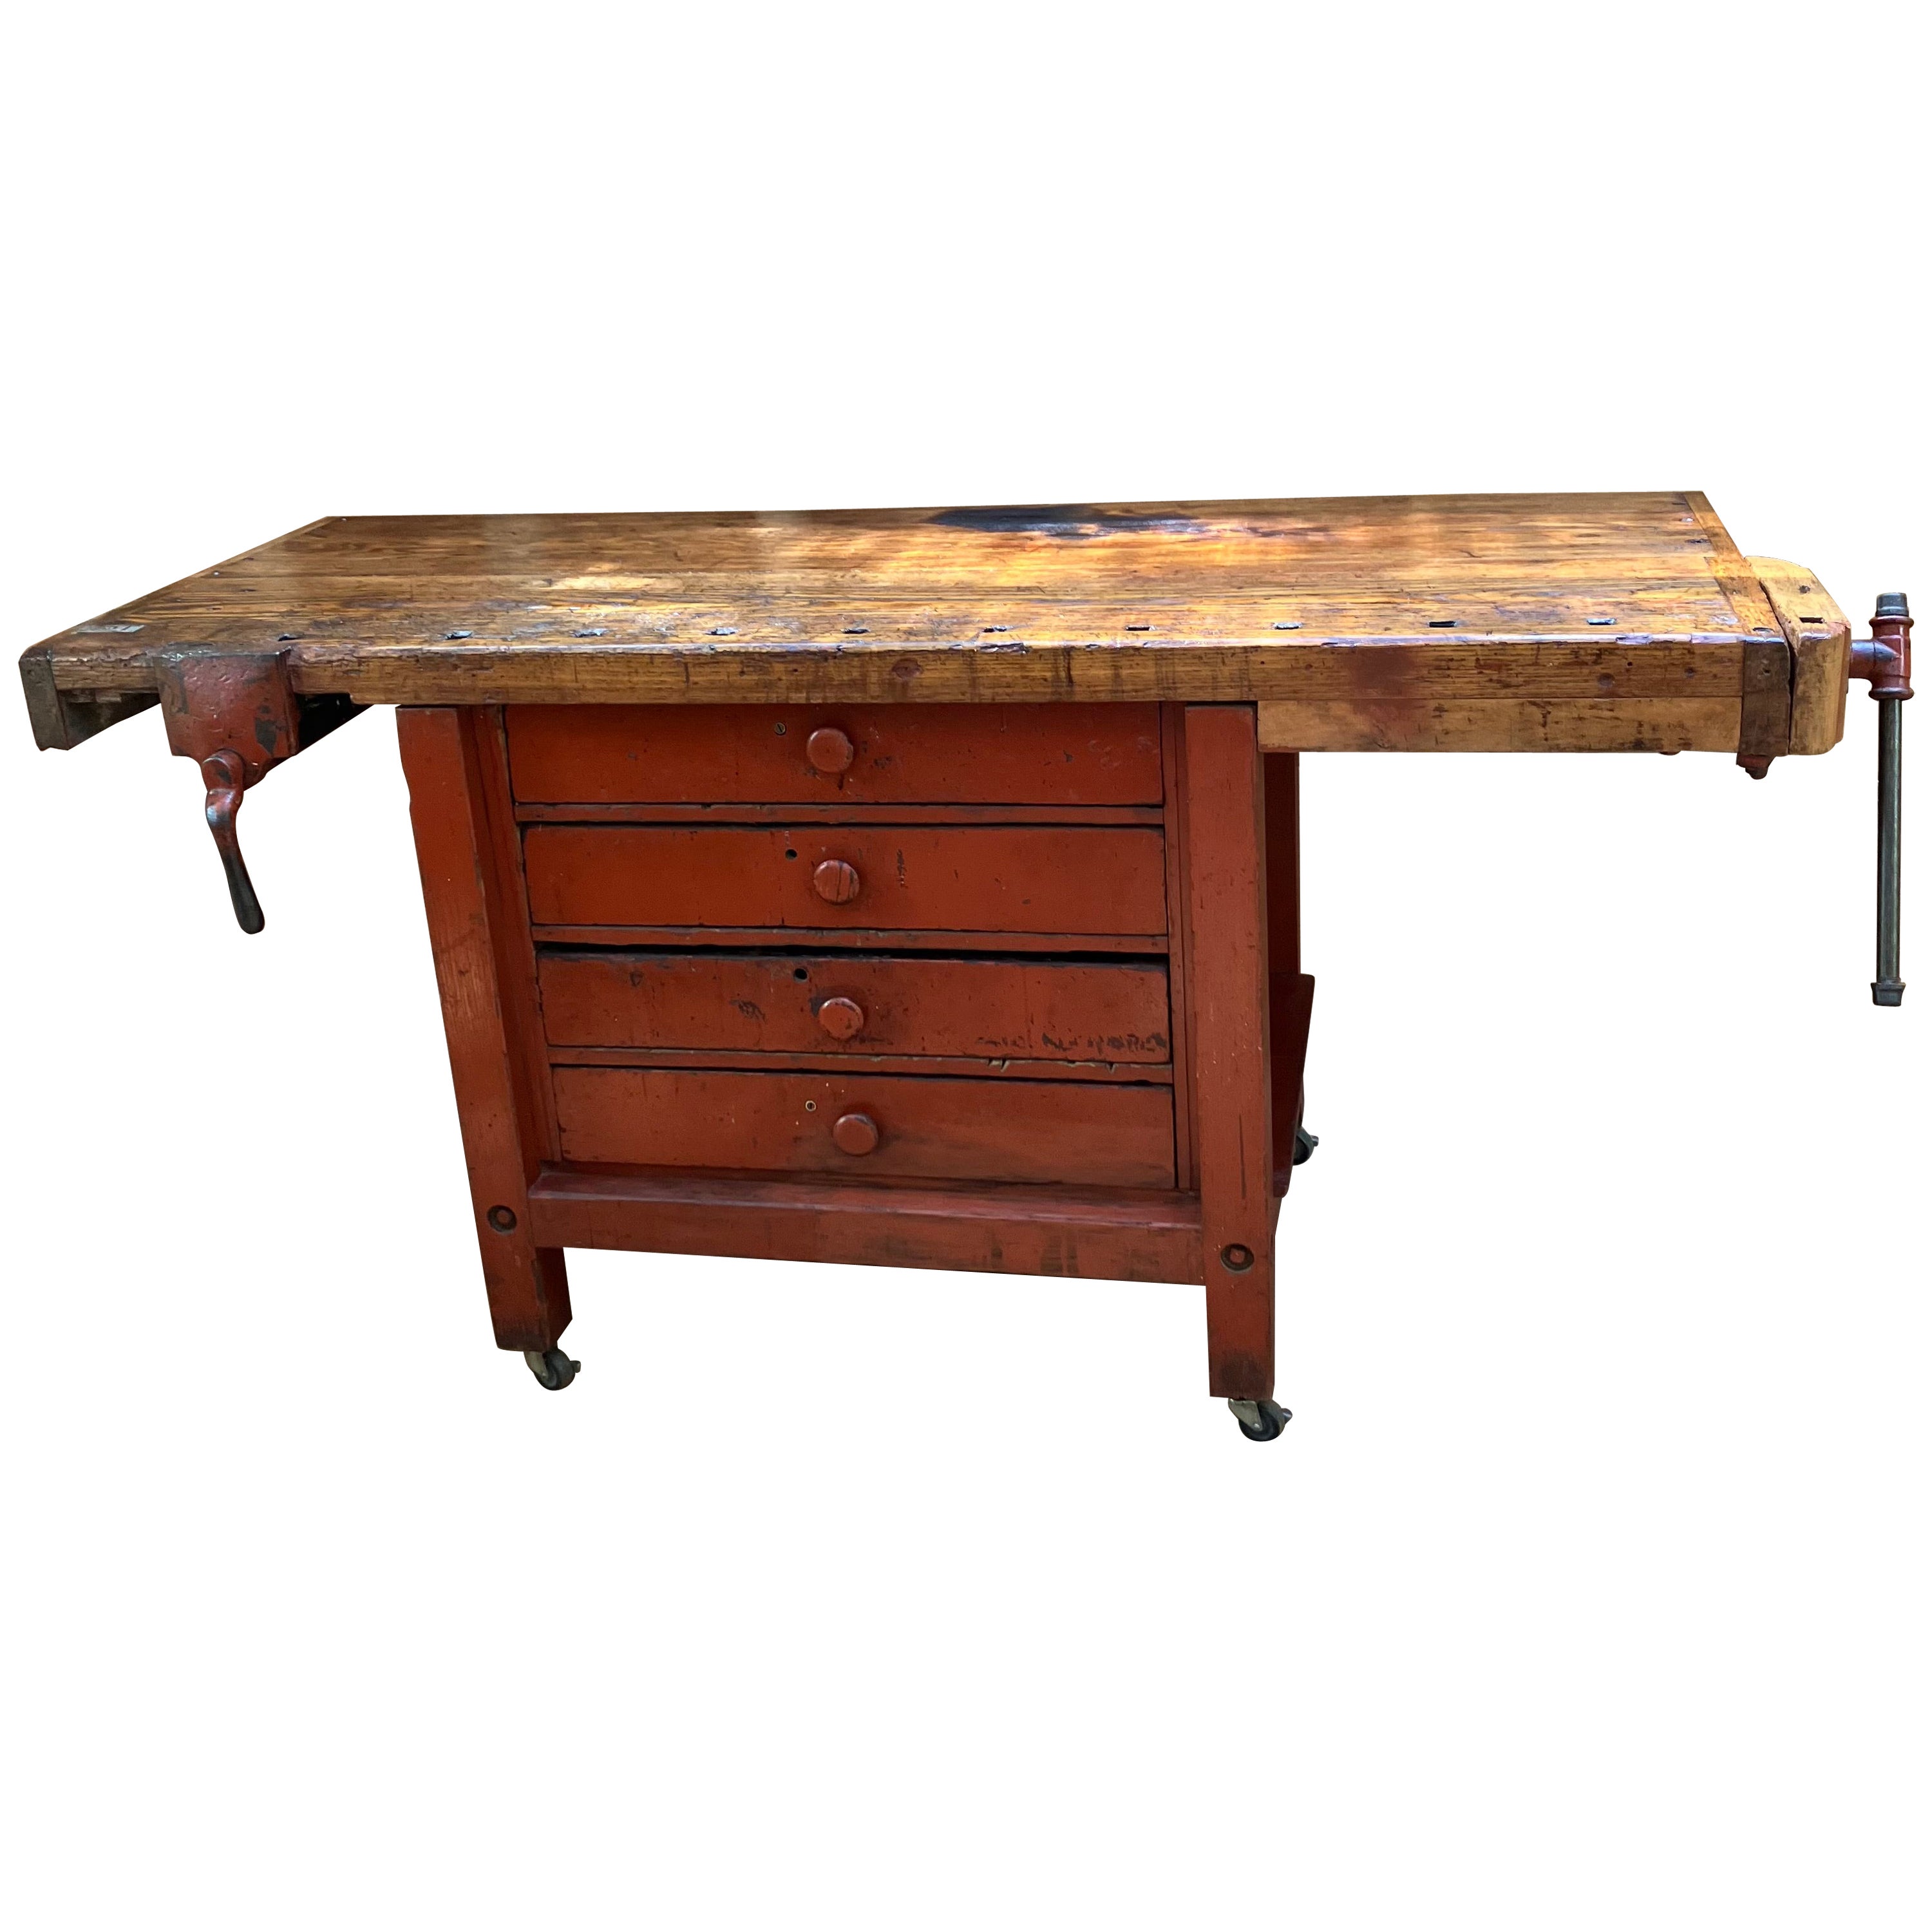 Antique 19th C Workbench For Sale